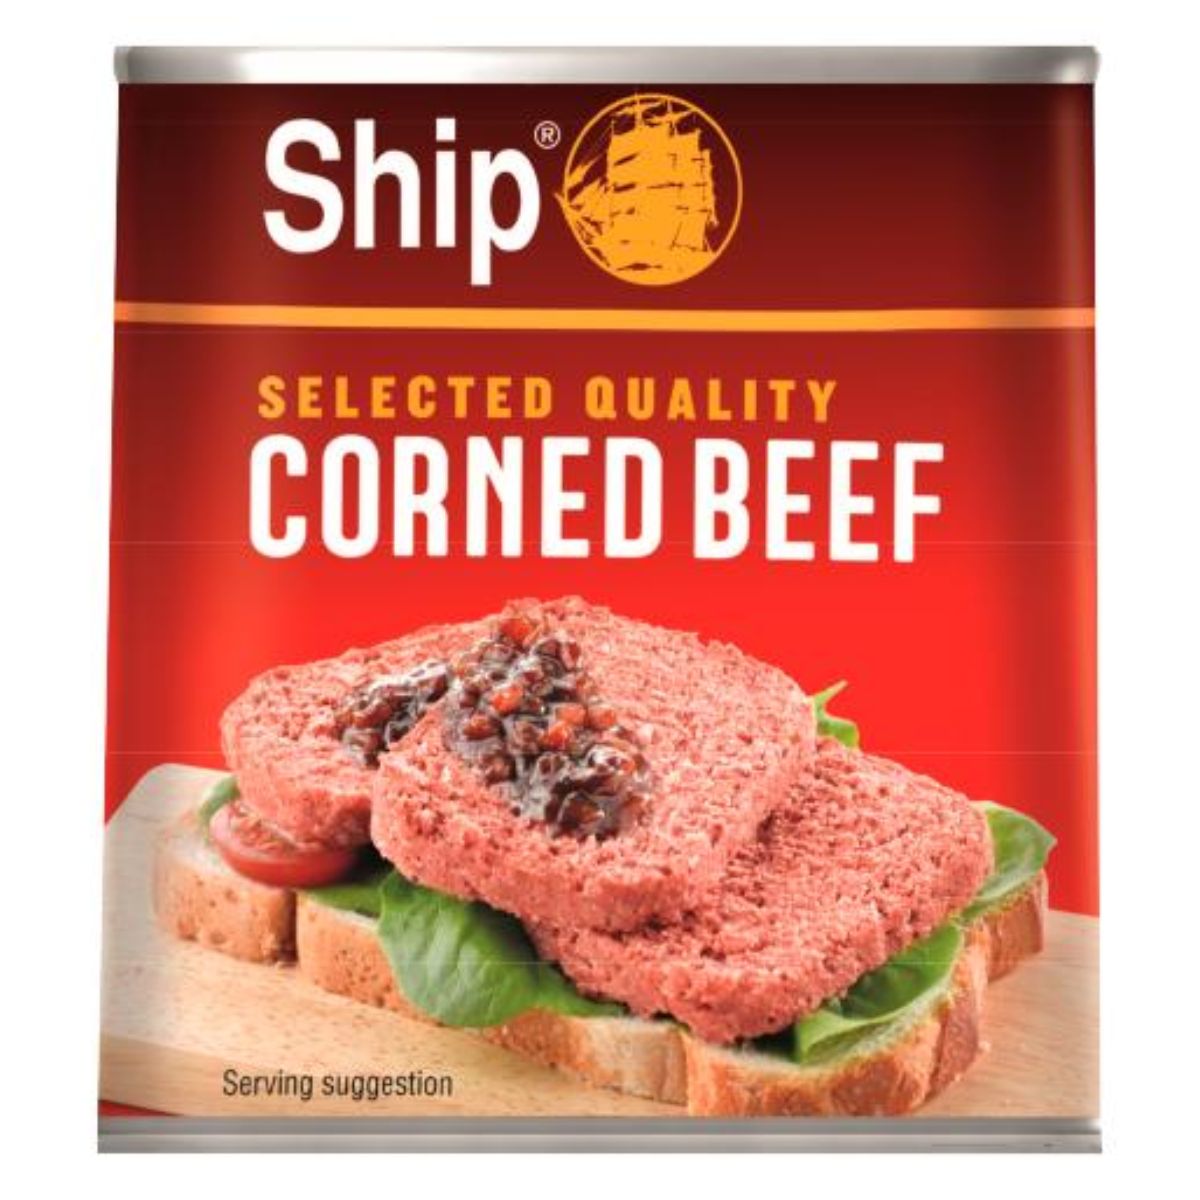 A can of Ship - Selected Quality Corned Beef - 340g with an image of a corned beef sandwich on the label, labeled as "selected quality.